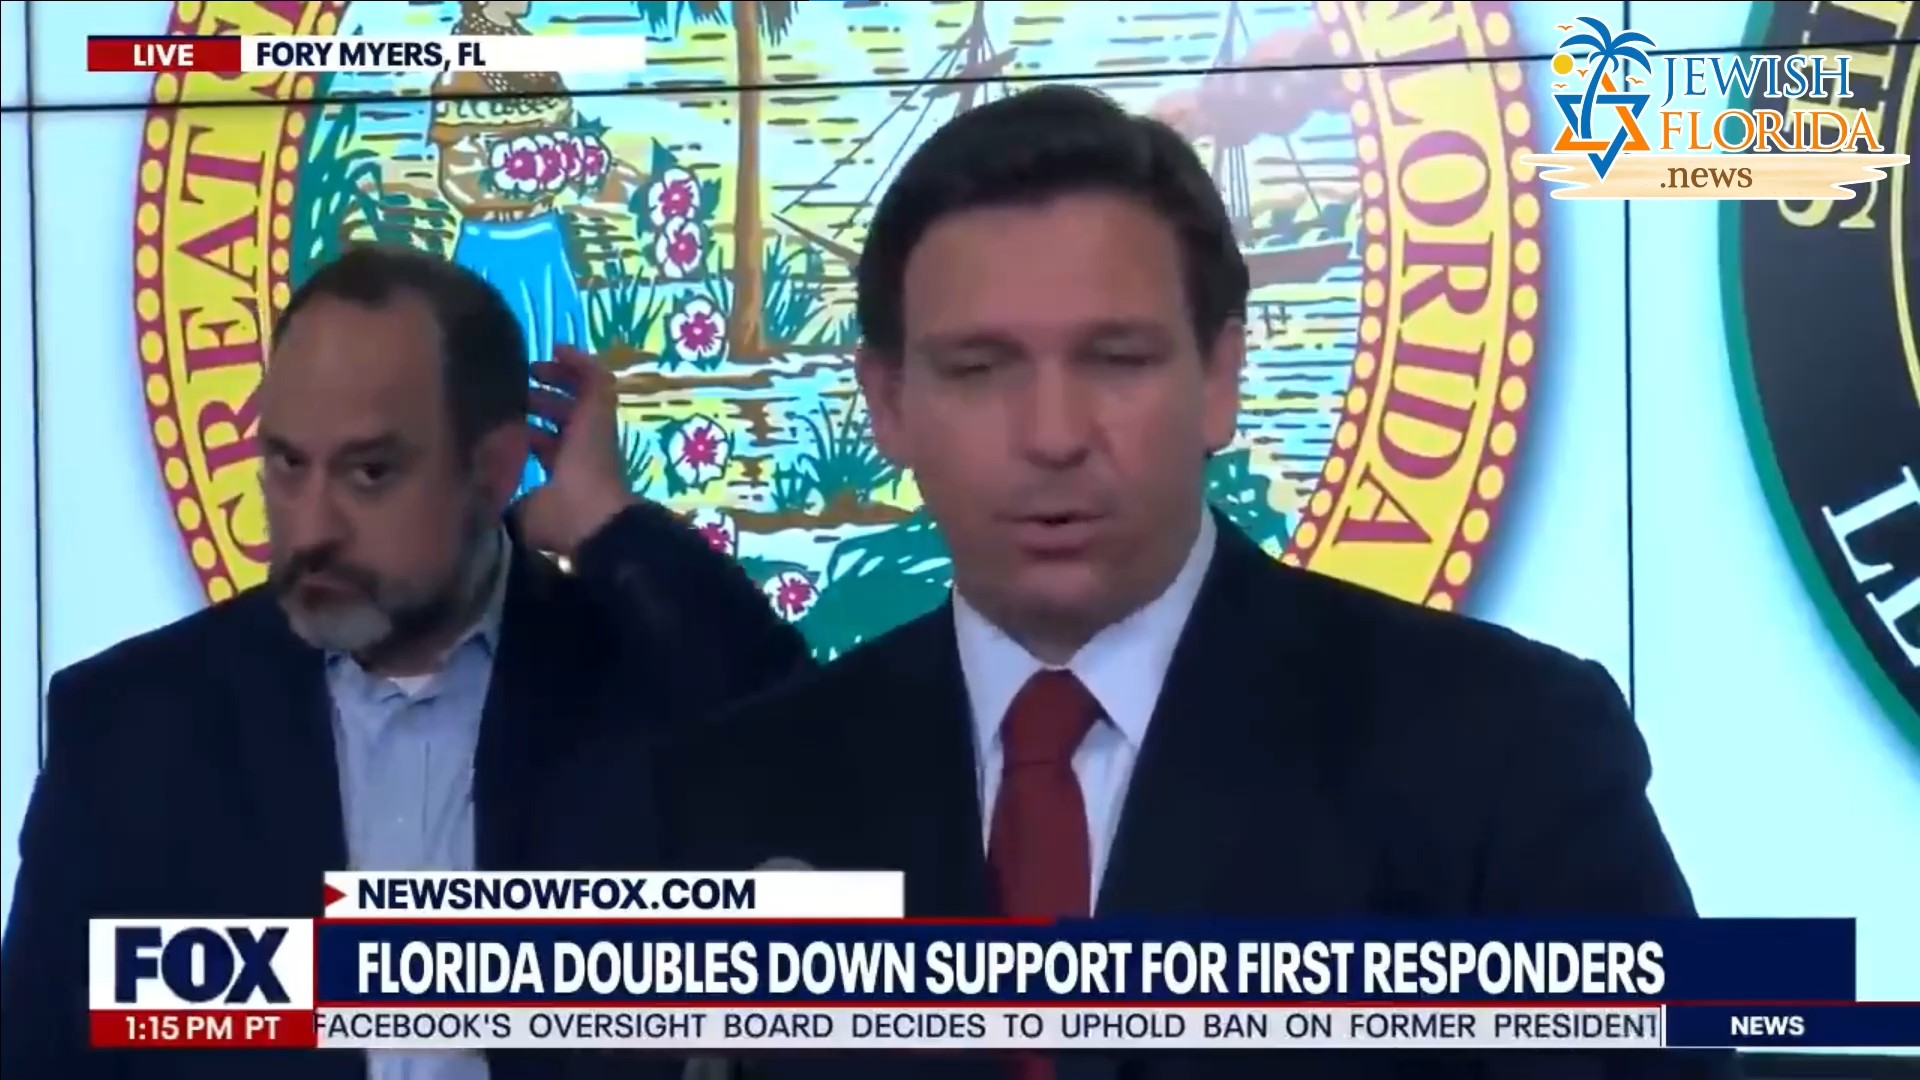 Governor DeSantis Warns BLM and Antifa to stay away from Florida or face “severe consequences”